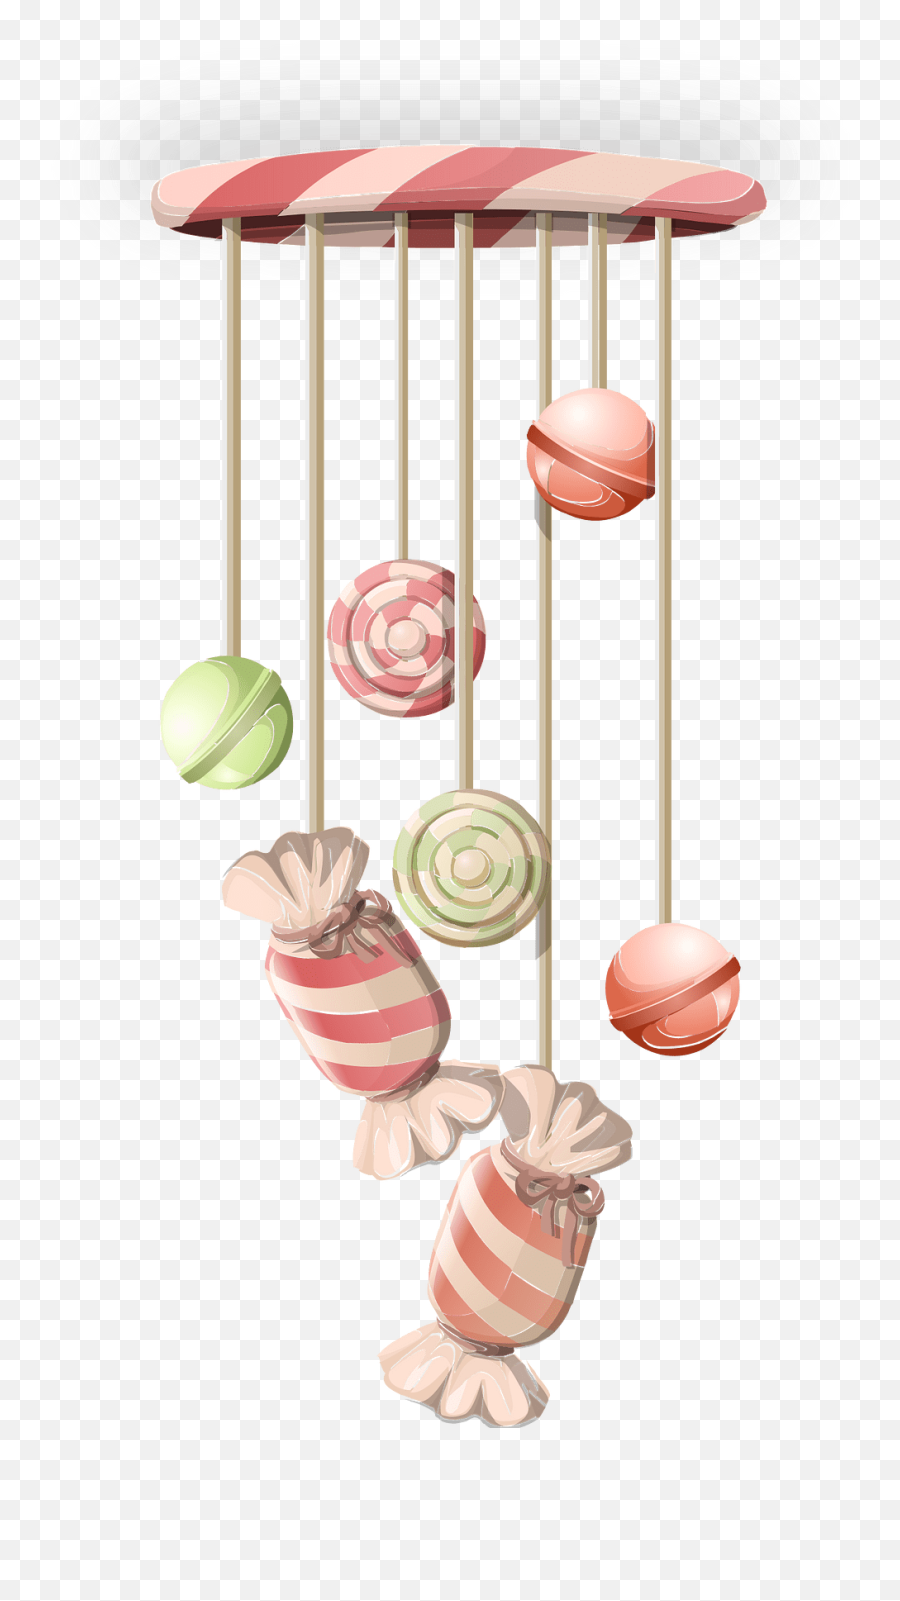 Hanging Candy Ceiling Decor Clipart Free Download Emoji,Baby Toys Clipart Black And White